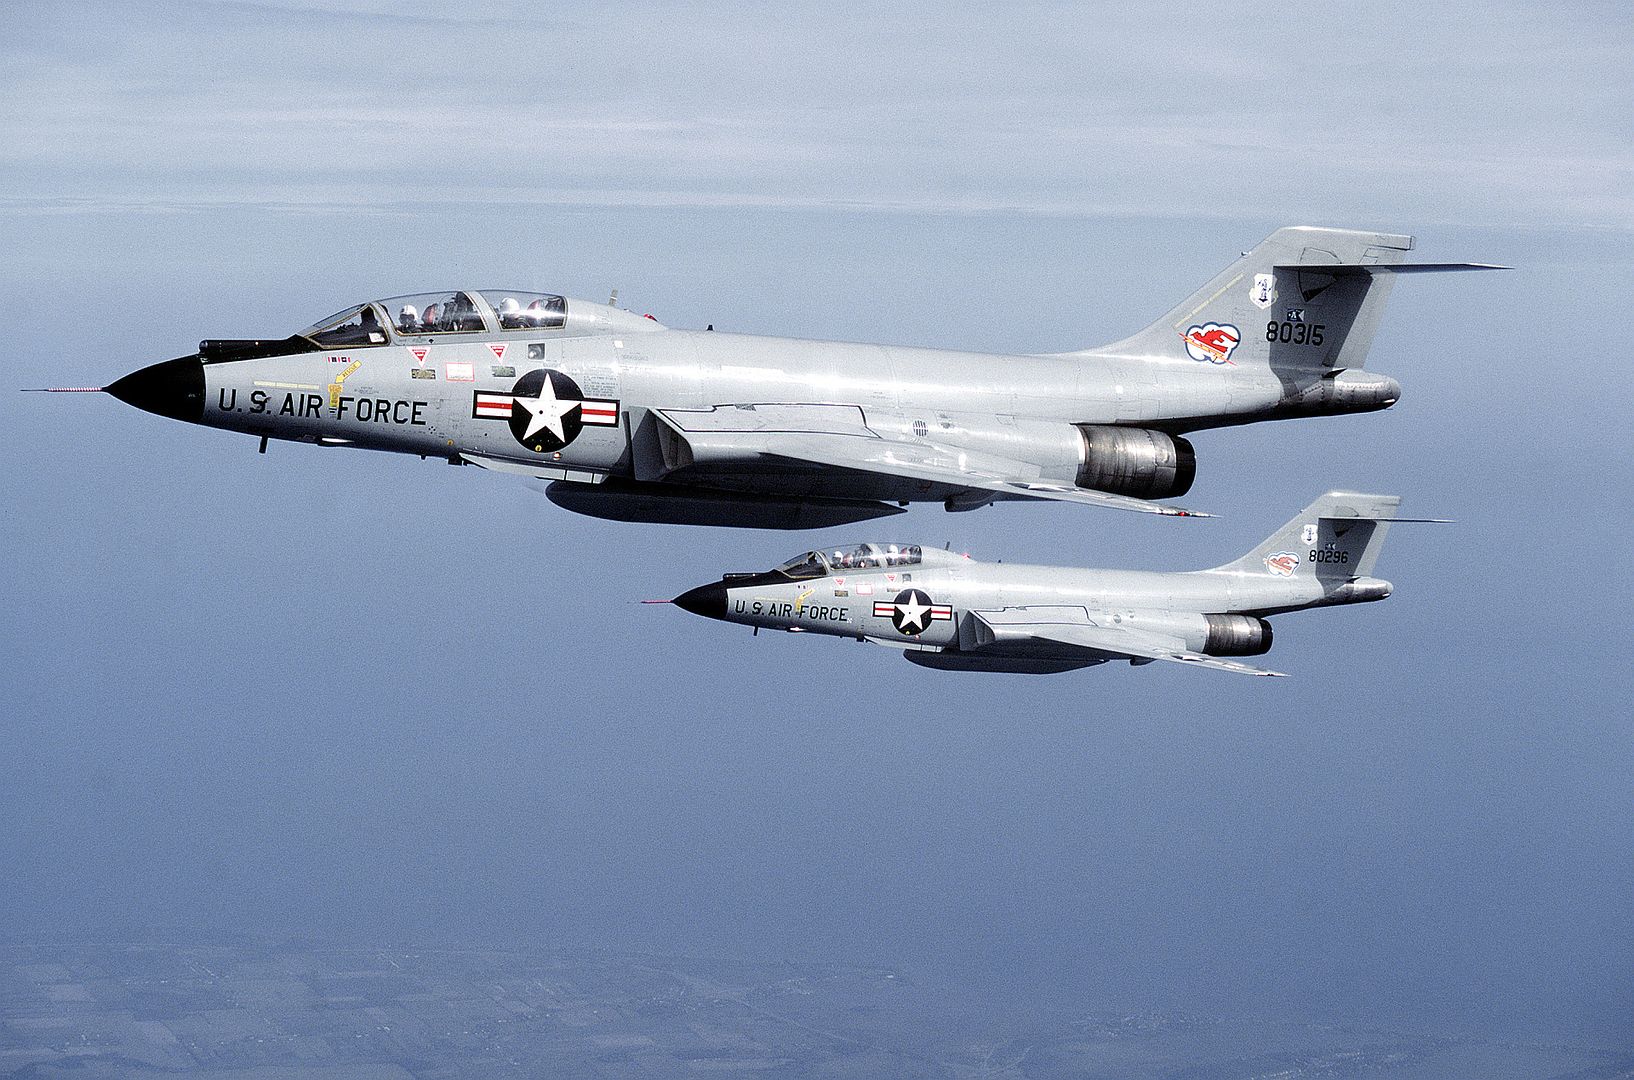  The Aircraft Are Assigned To The 107th Fighter Interceptor Group New York Air National Guard North American Air Defense Command